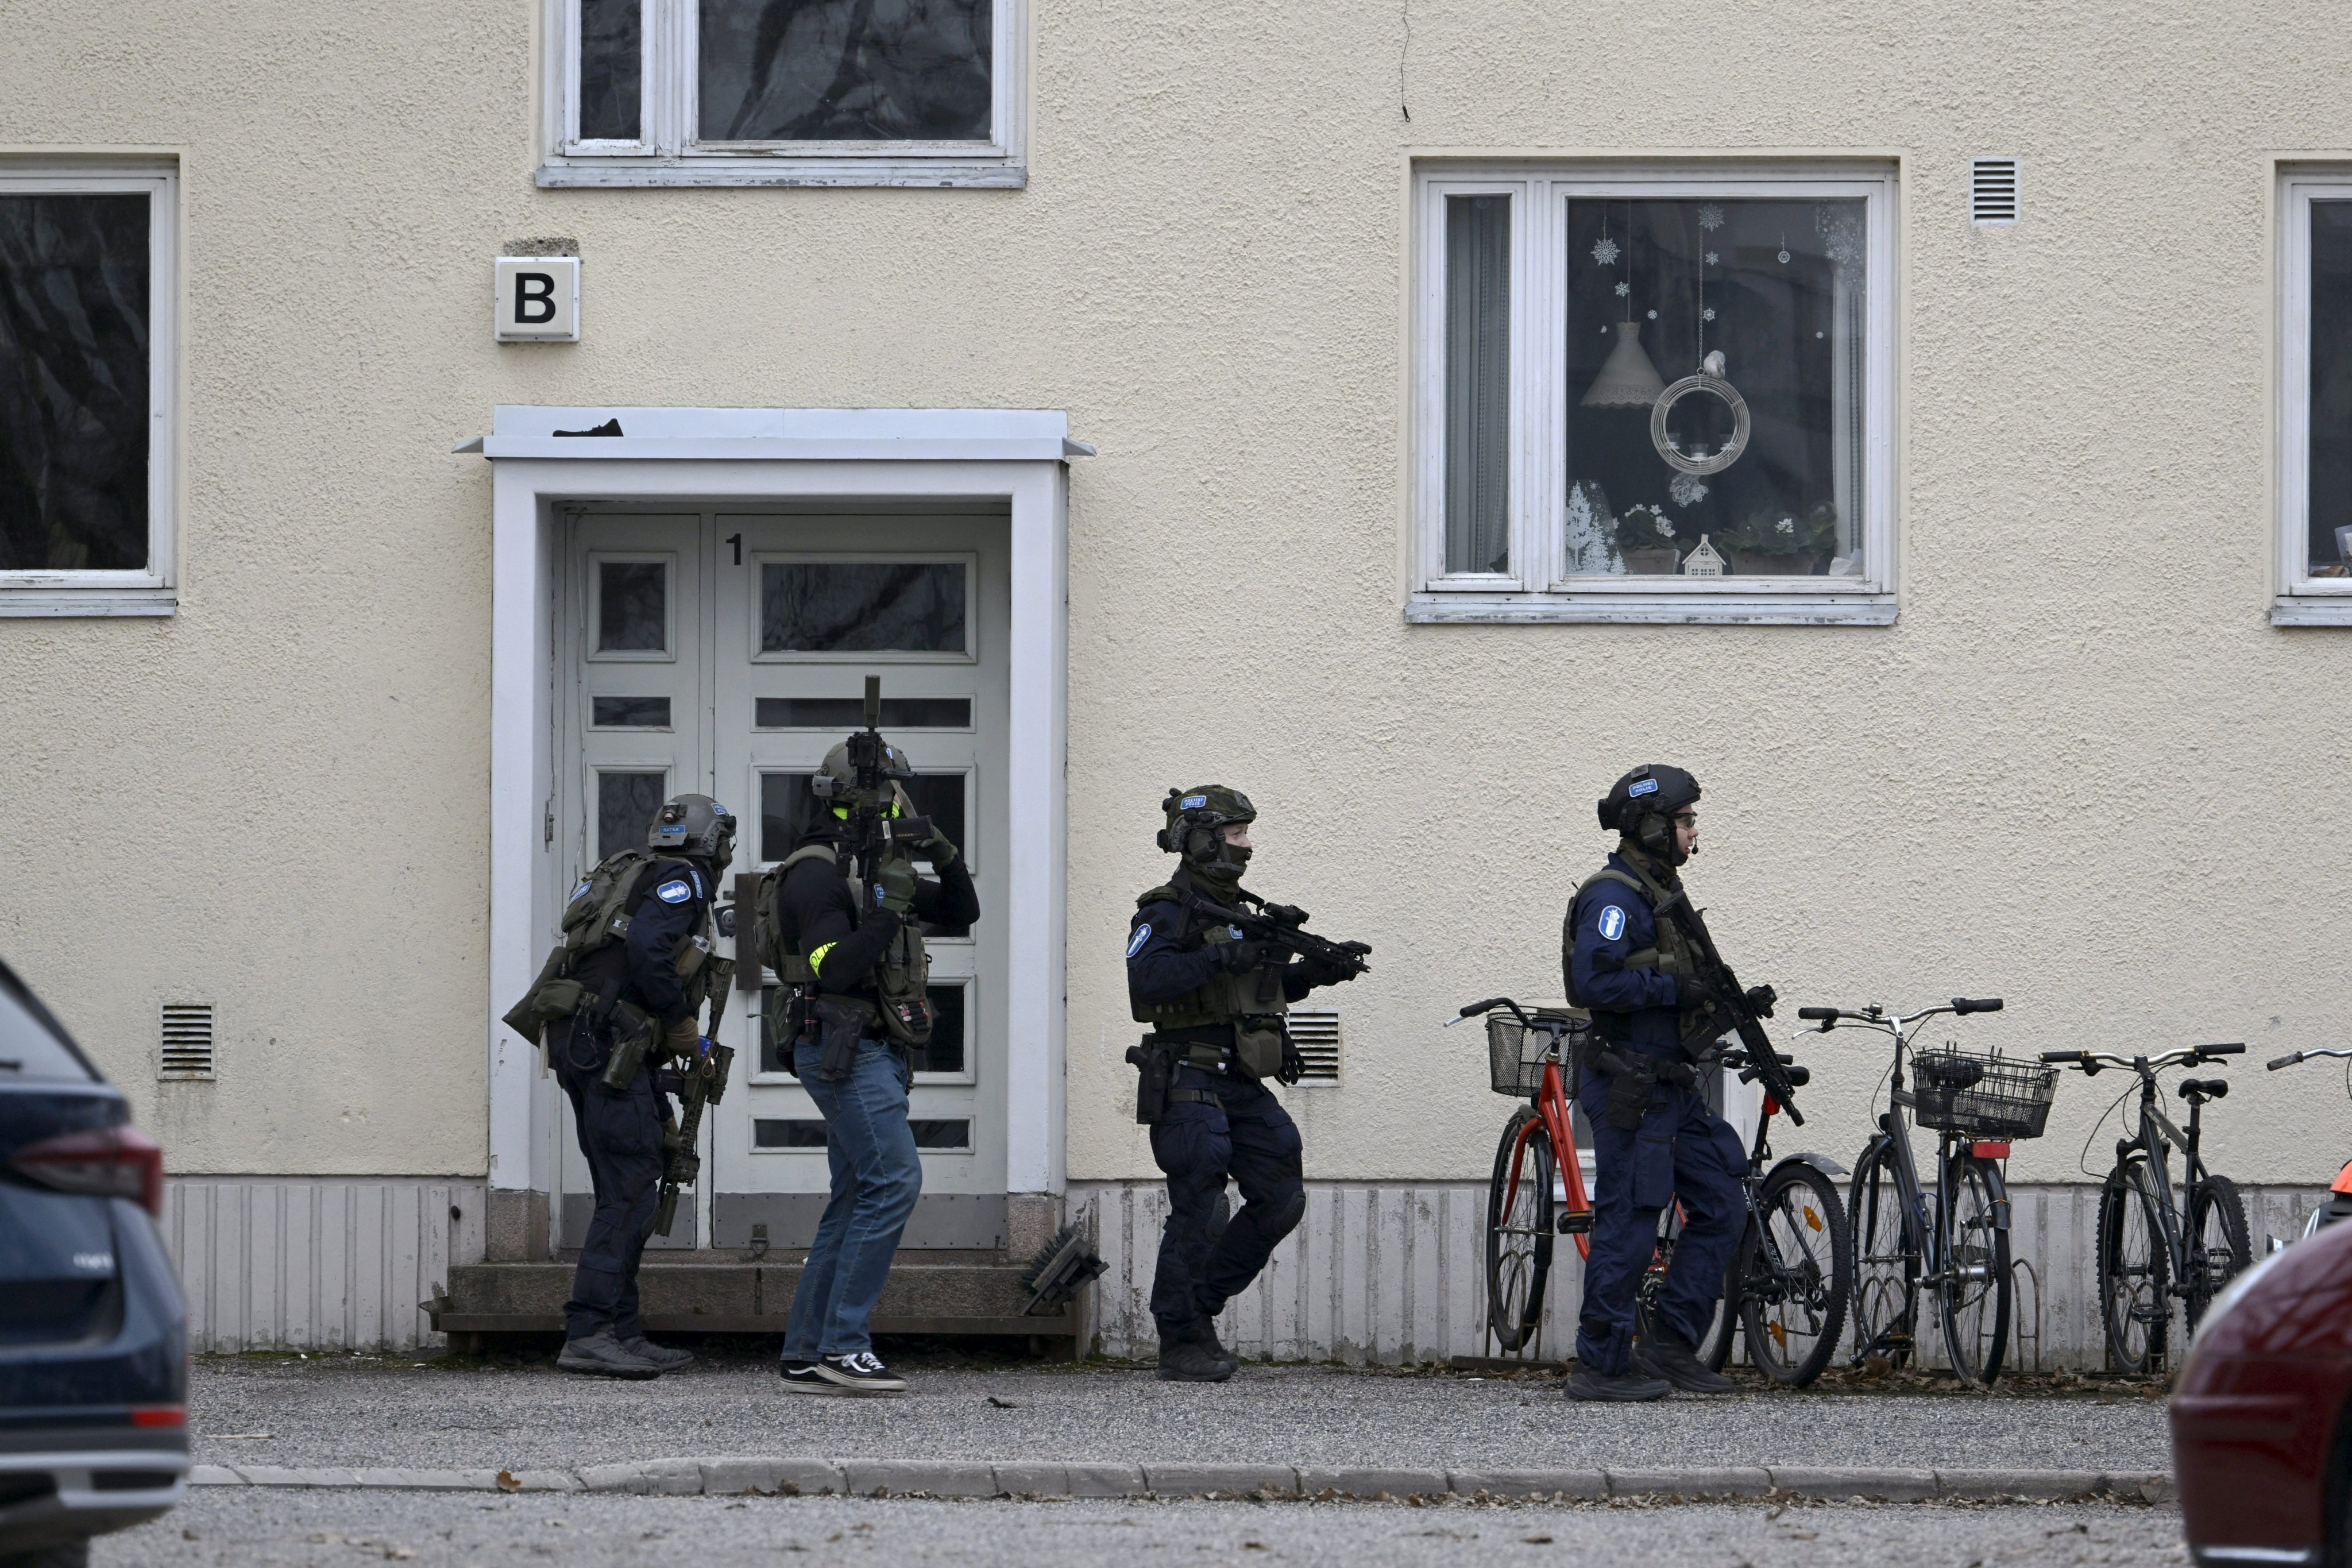 Three minors were injured in a shooting in Finland. The suspect, also a minor, was caught by police. Photo: Reuters